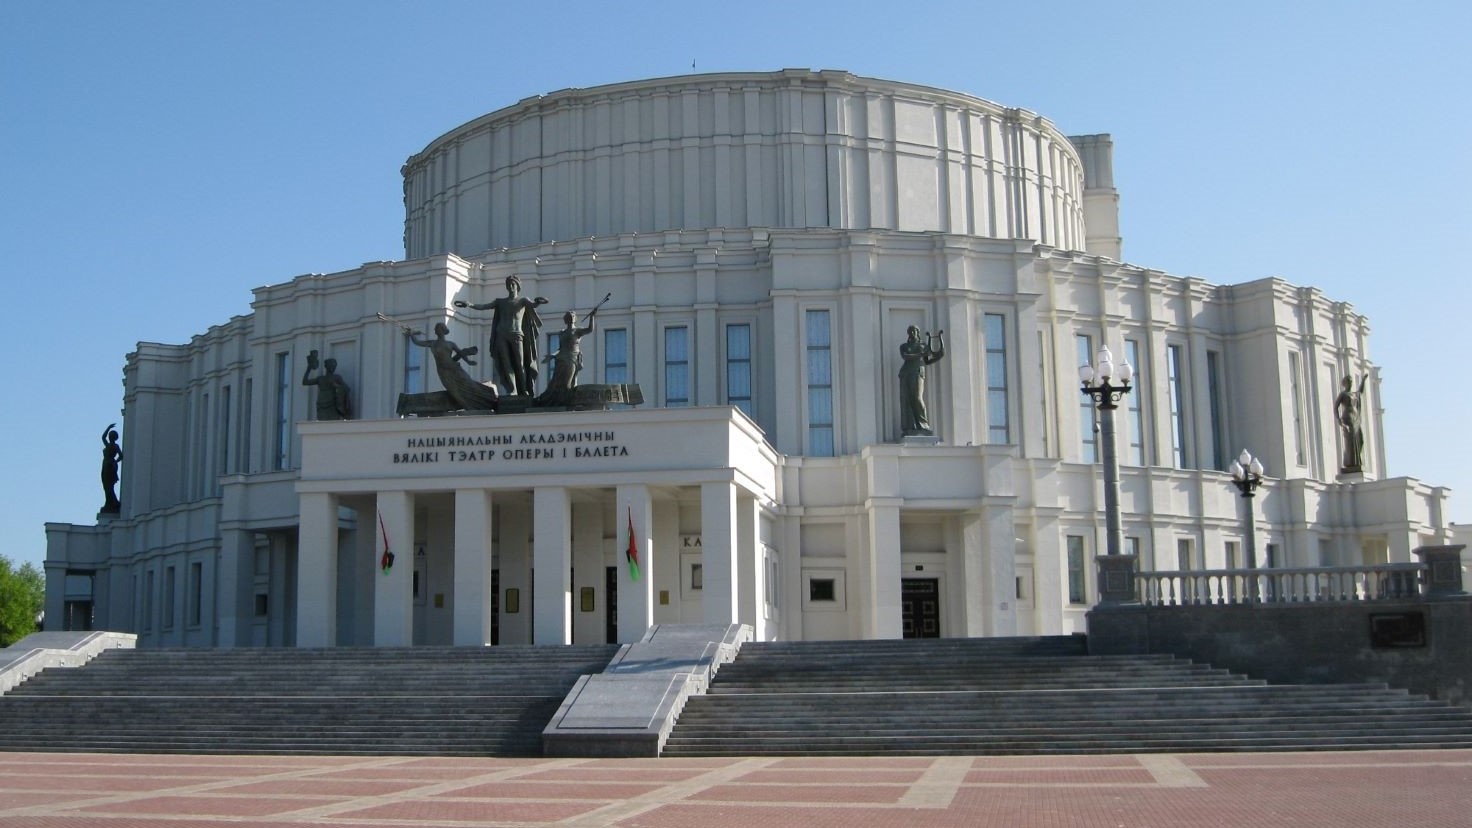 Exterior of the National Academic Grand Opera and Ballet Theatre of the Republic of Belarus in Minsk I © SBS Bühnentechnik